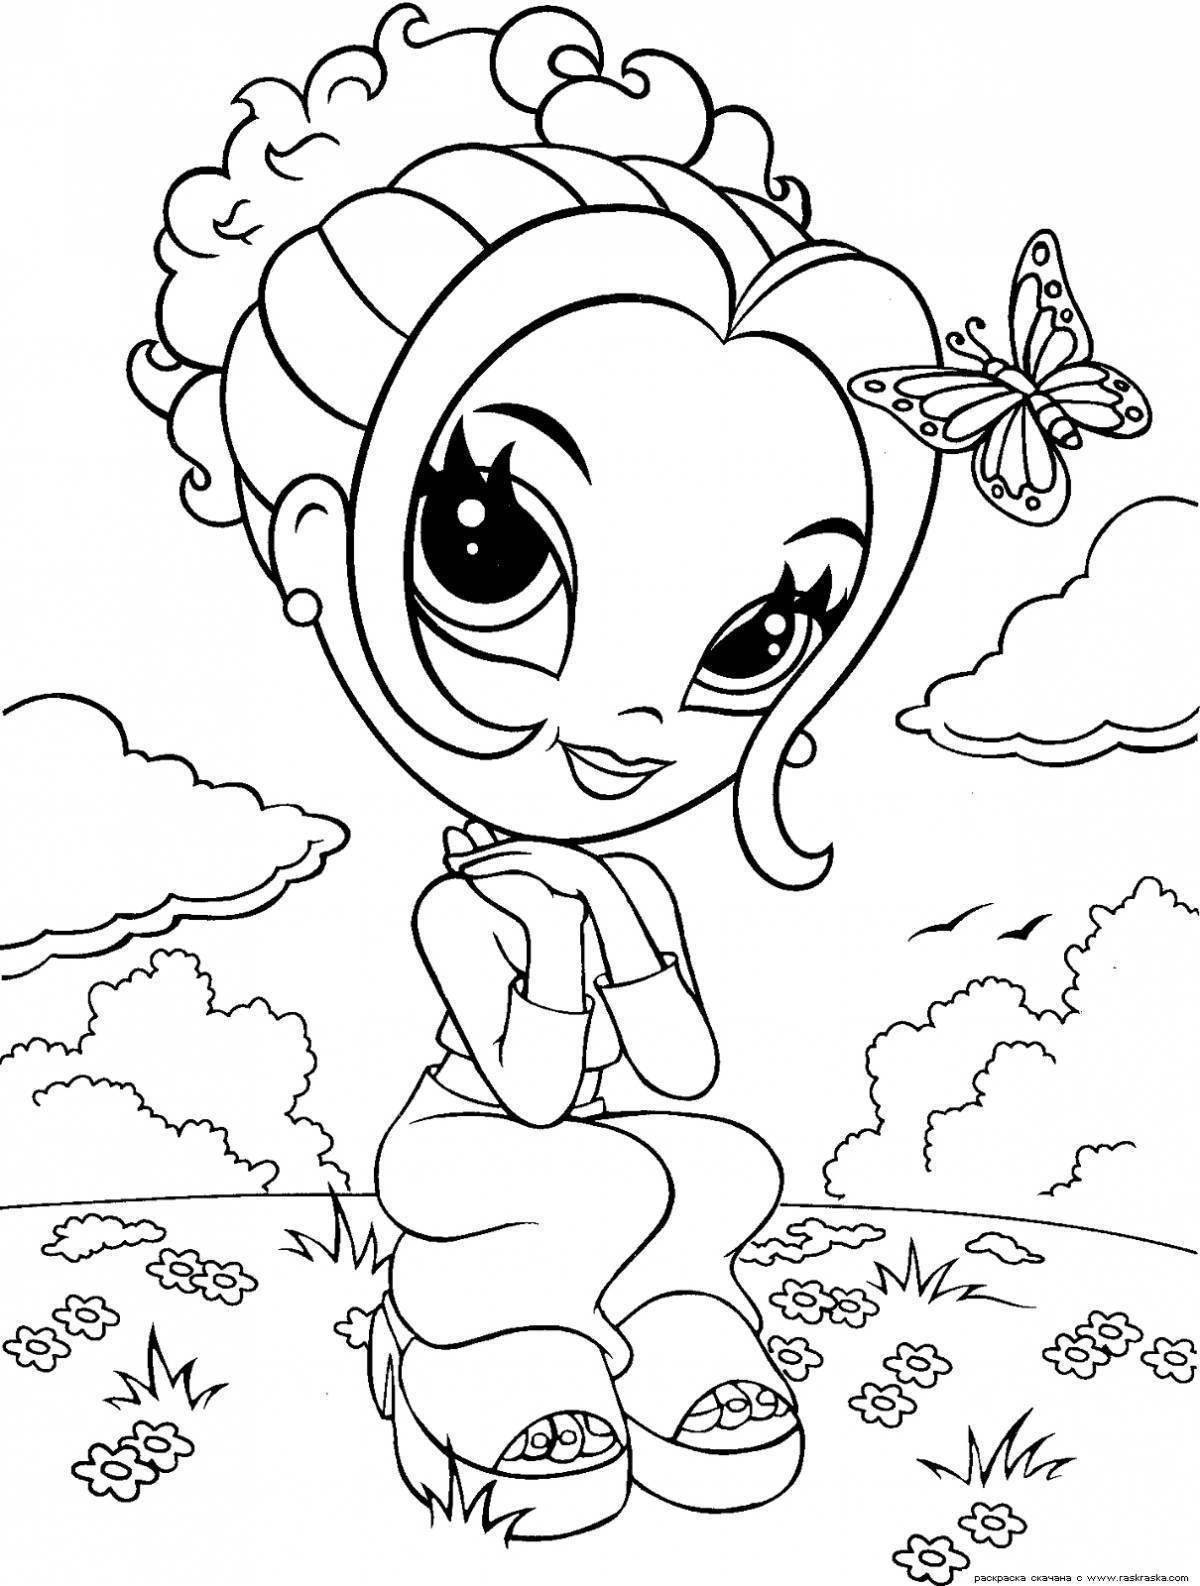 A wonderful coloring book for girls 5-7 years old